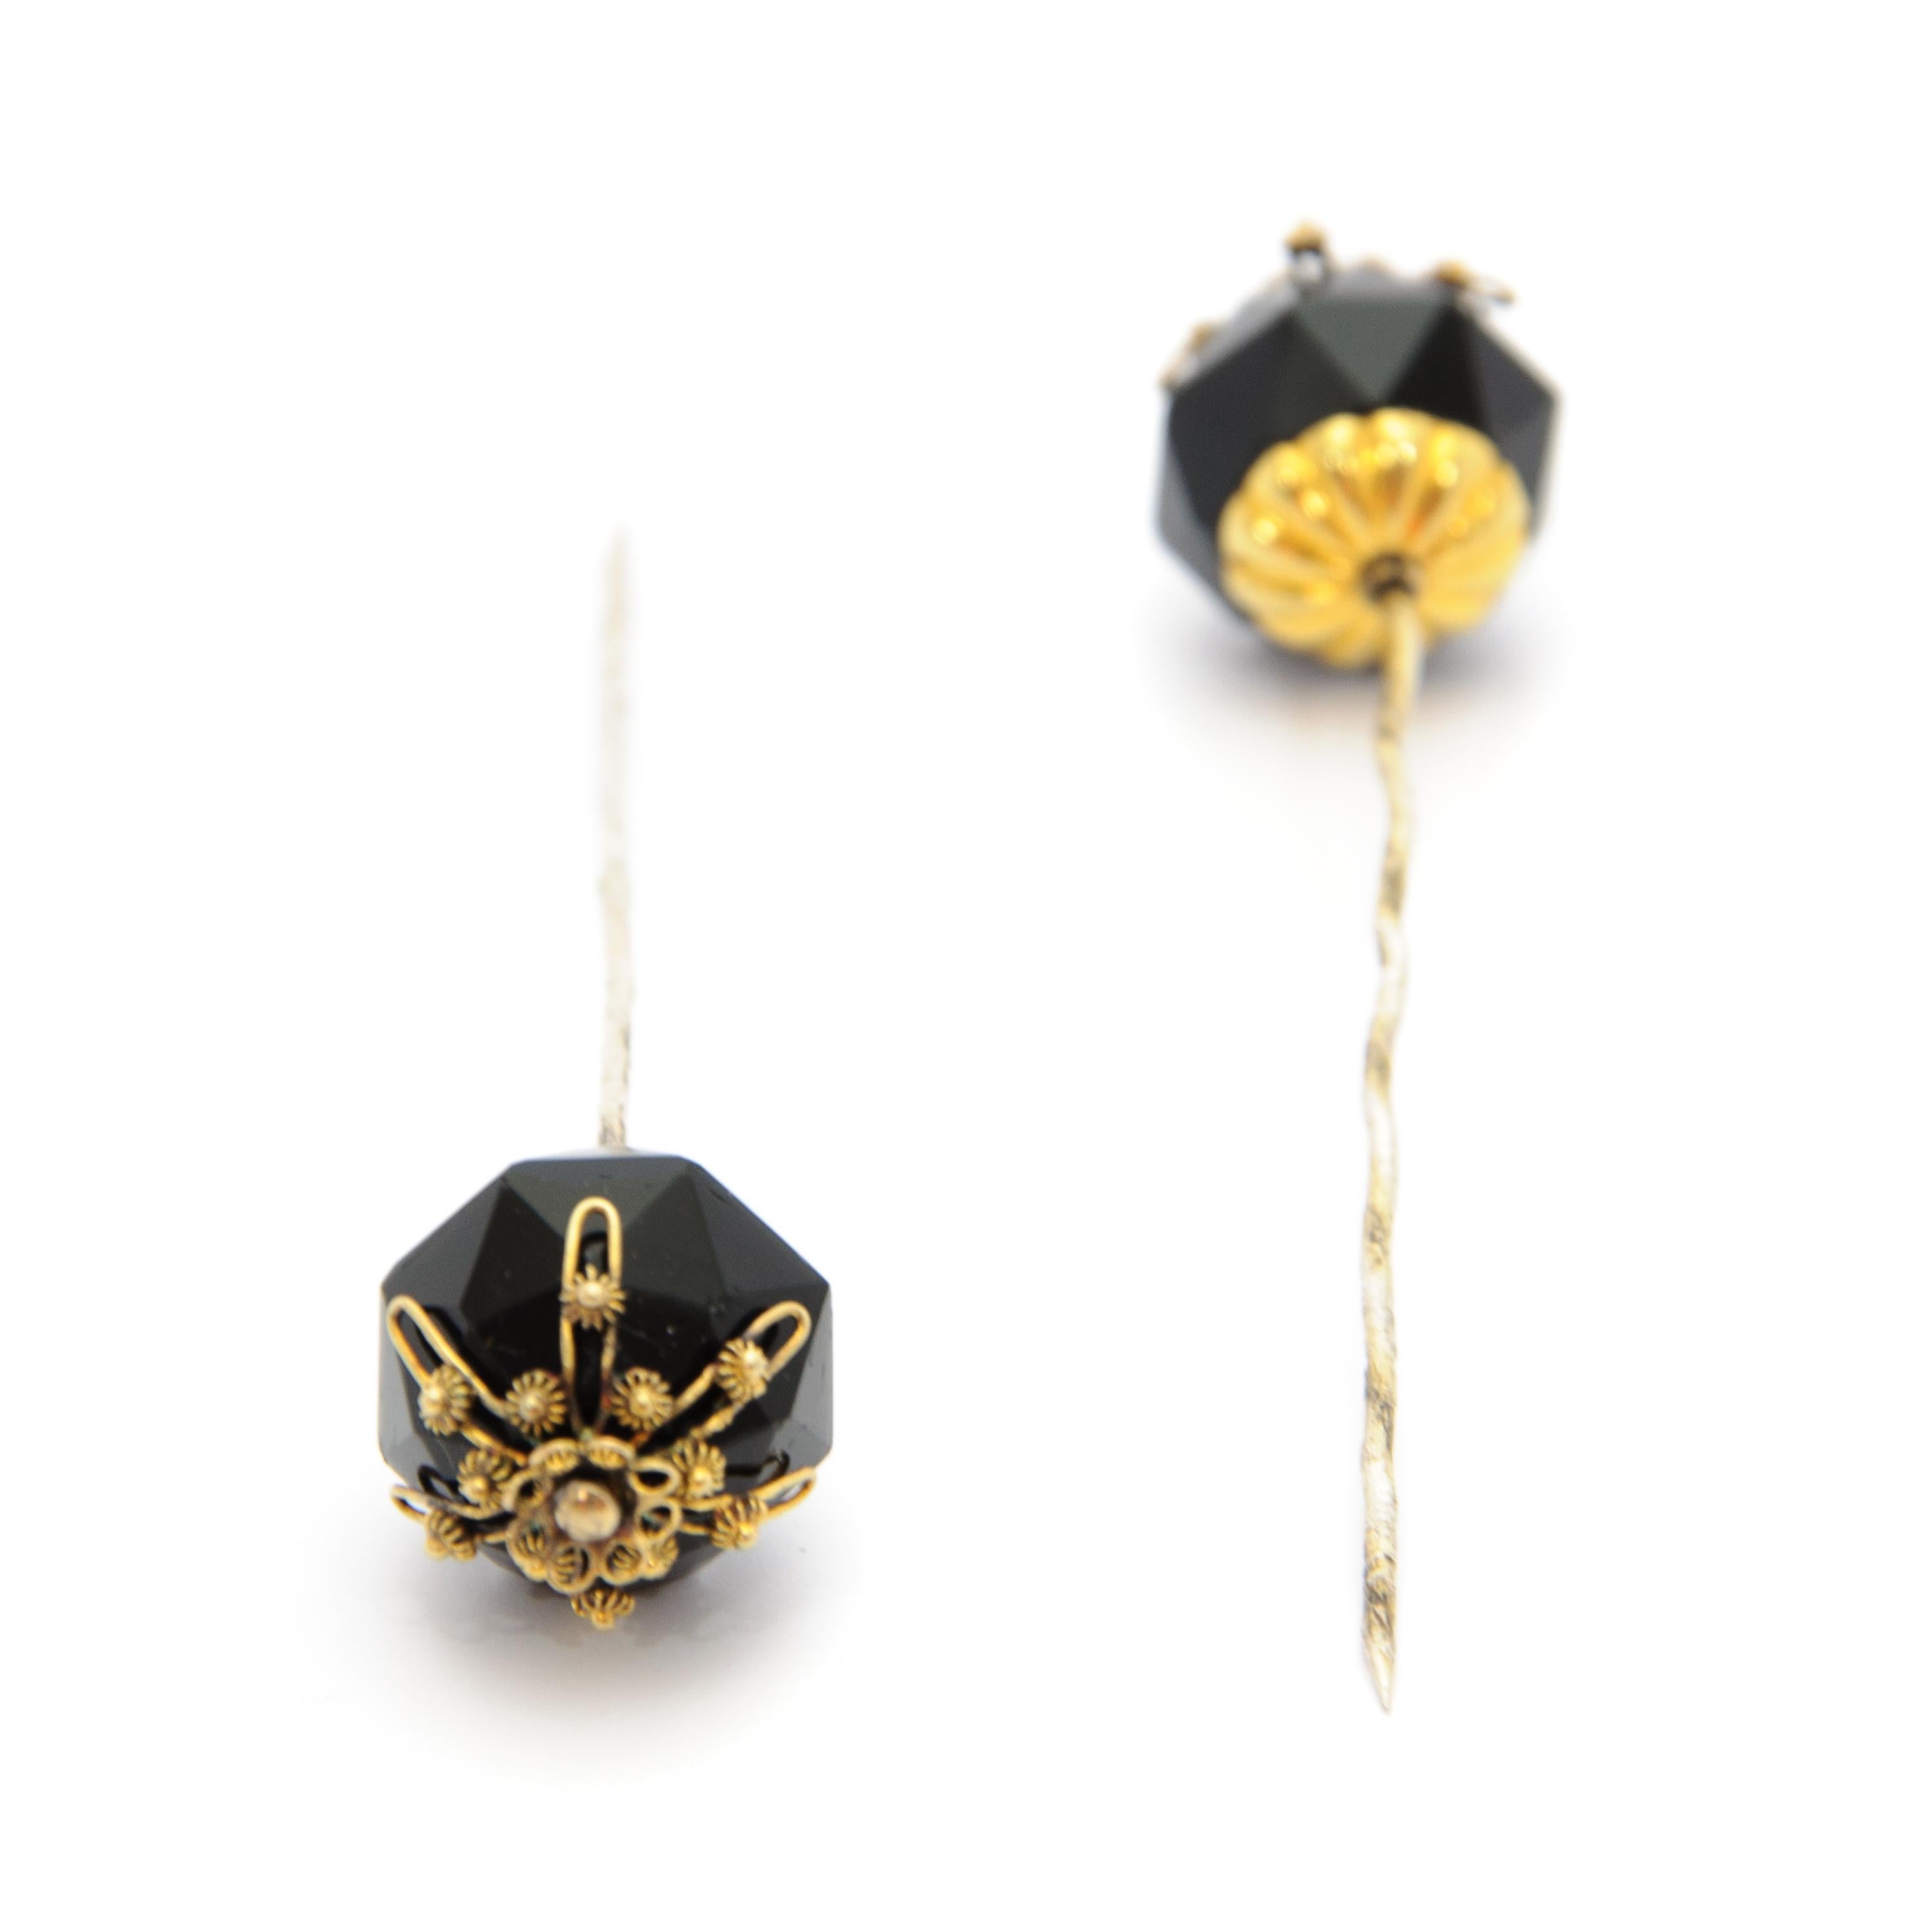 These antique 19th century stick pins are made of black jet and adorned with 14 karat gold cannetille work. The black stone rests on an engraved rosette. The pin itself is gilded and beautifully twisted from top to bottom.

These stick pins